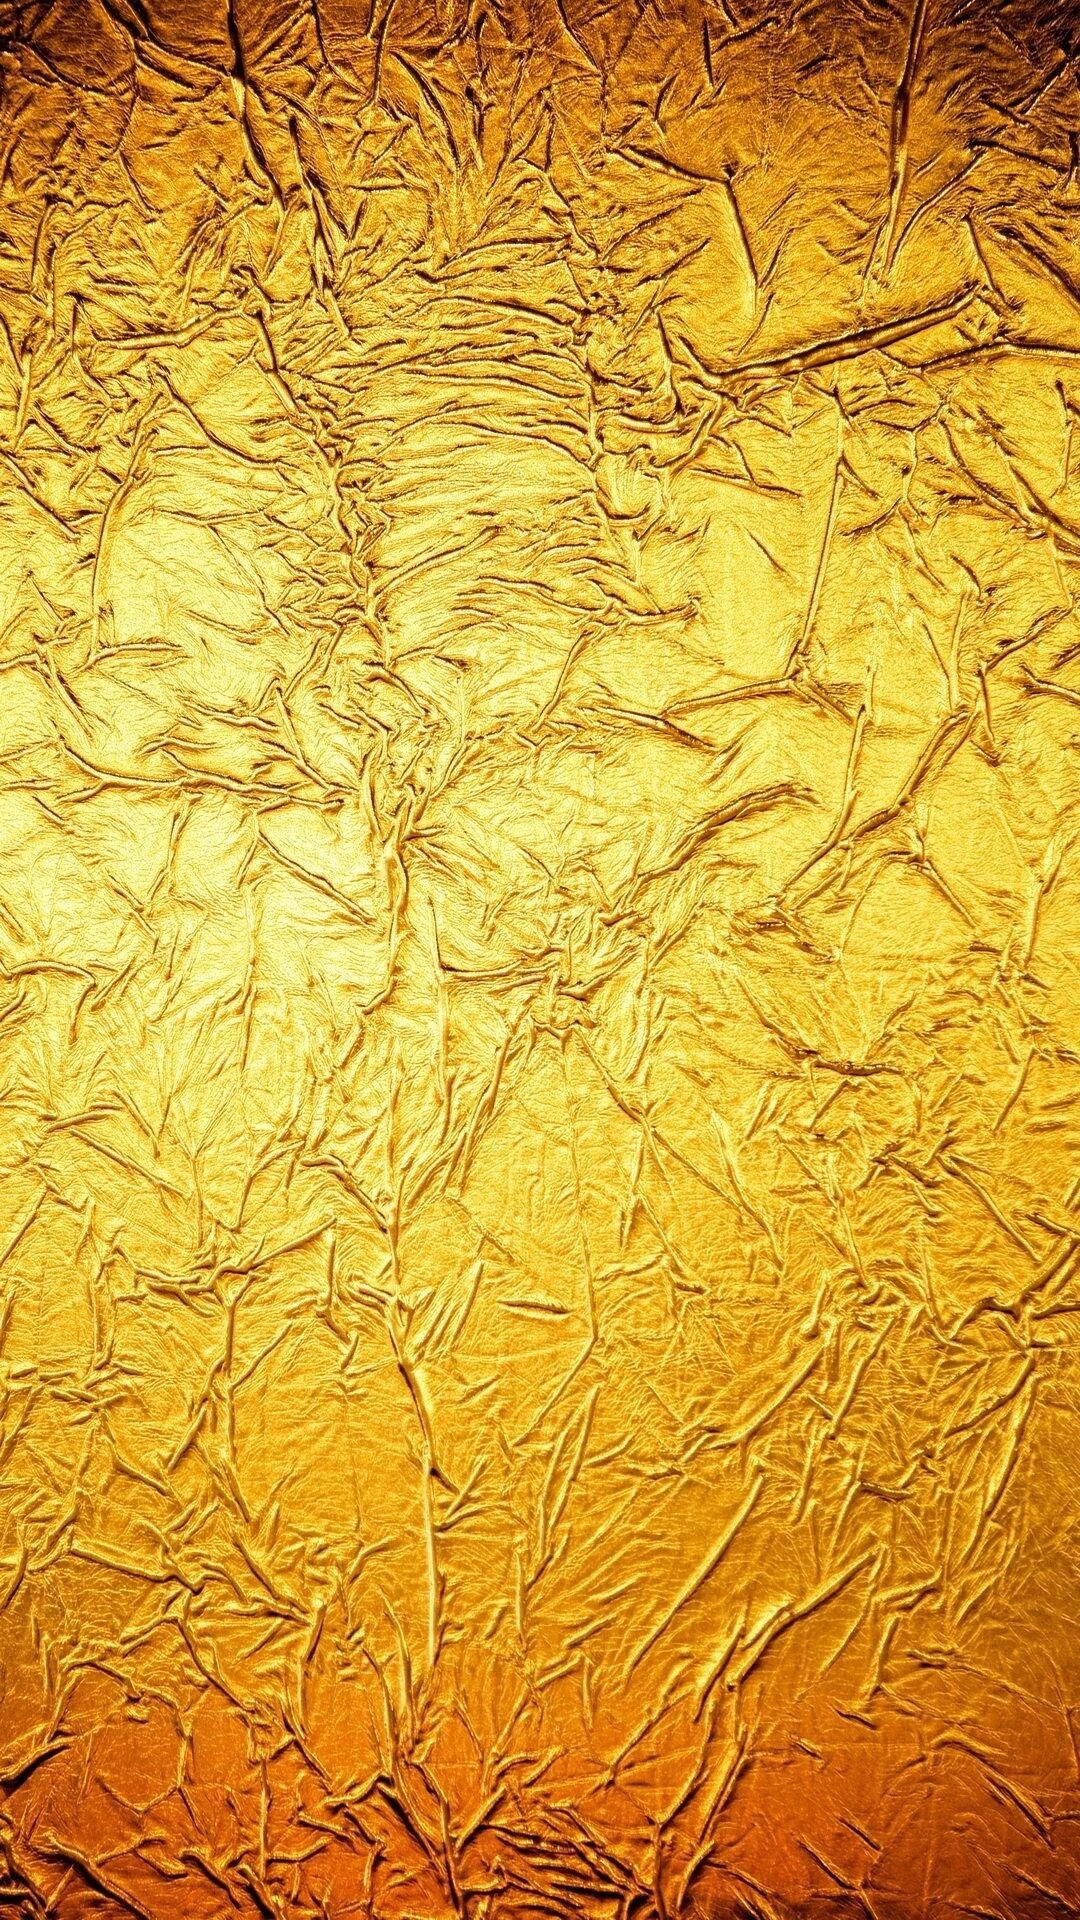 Gold Foil: Slightly reddish yellow metal that has been hammered into a thin sheet. 1080x1920 Full HD Background.